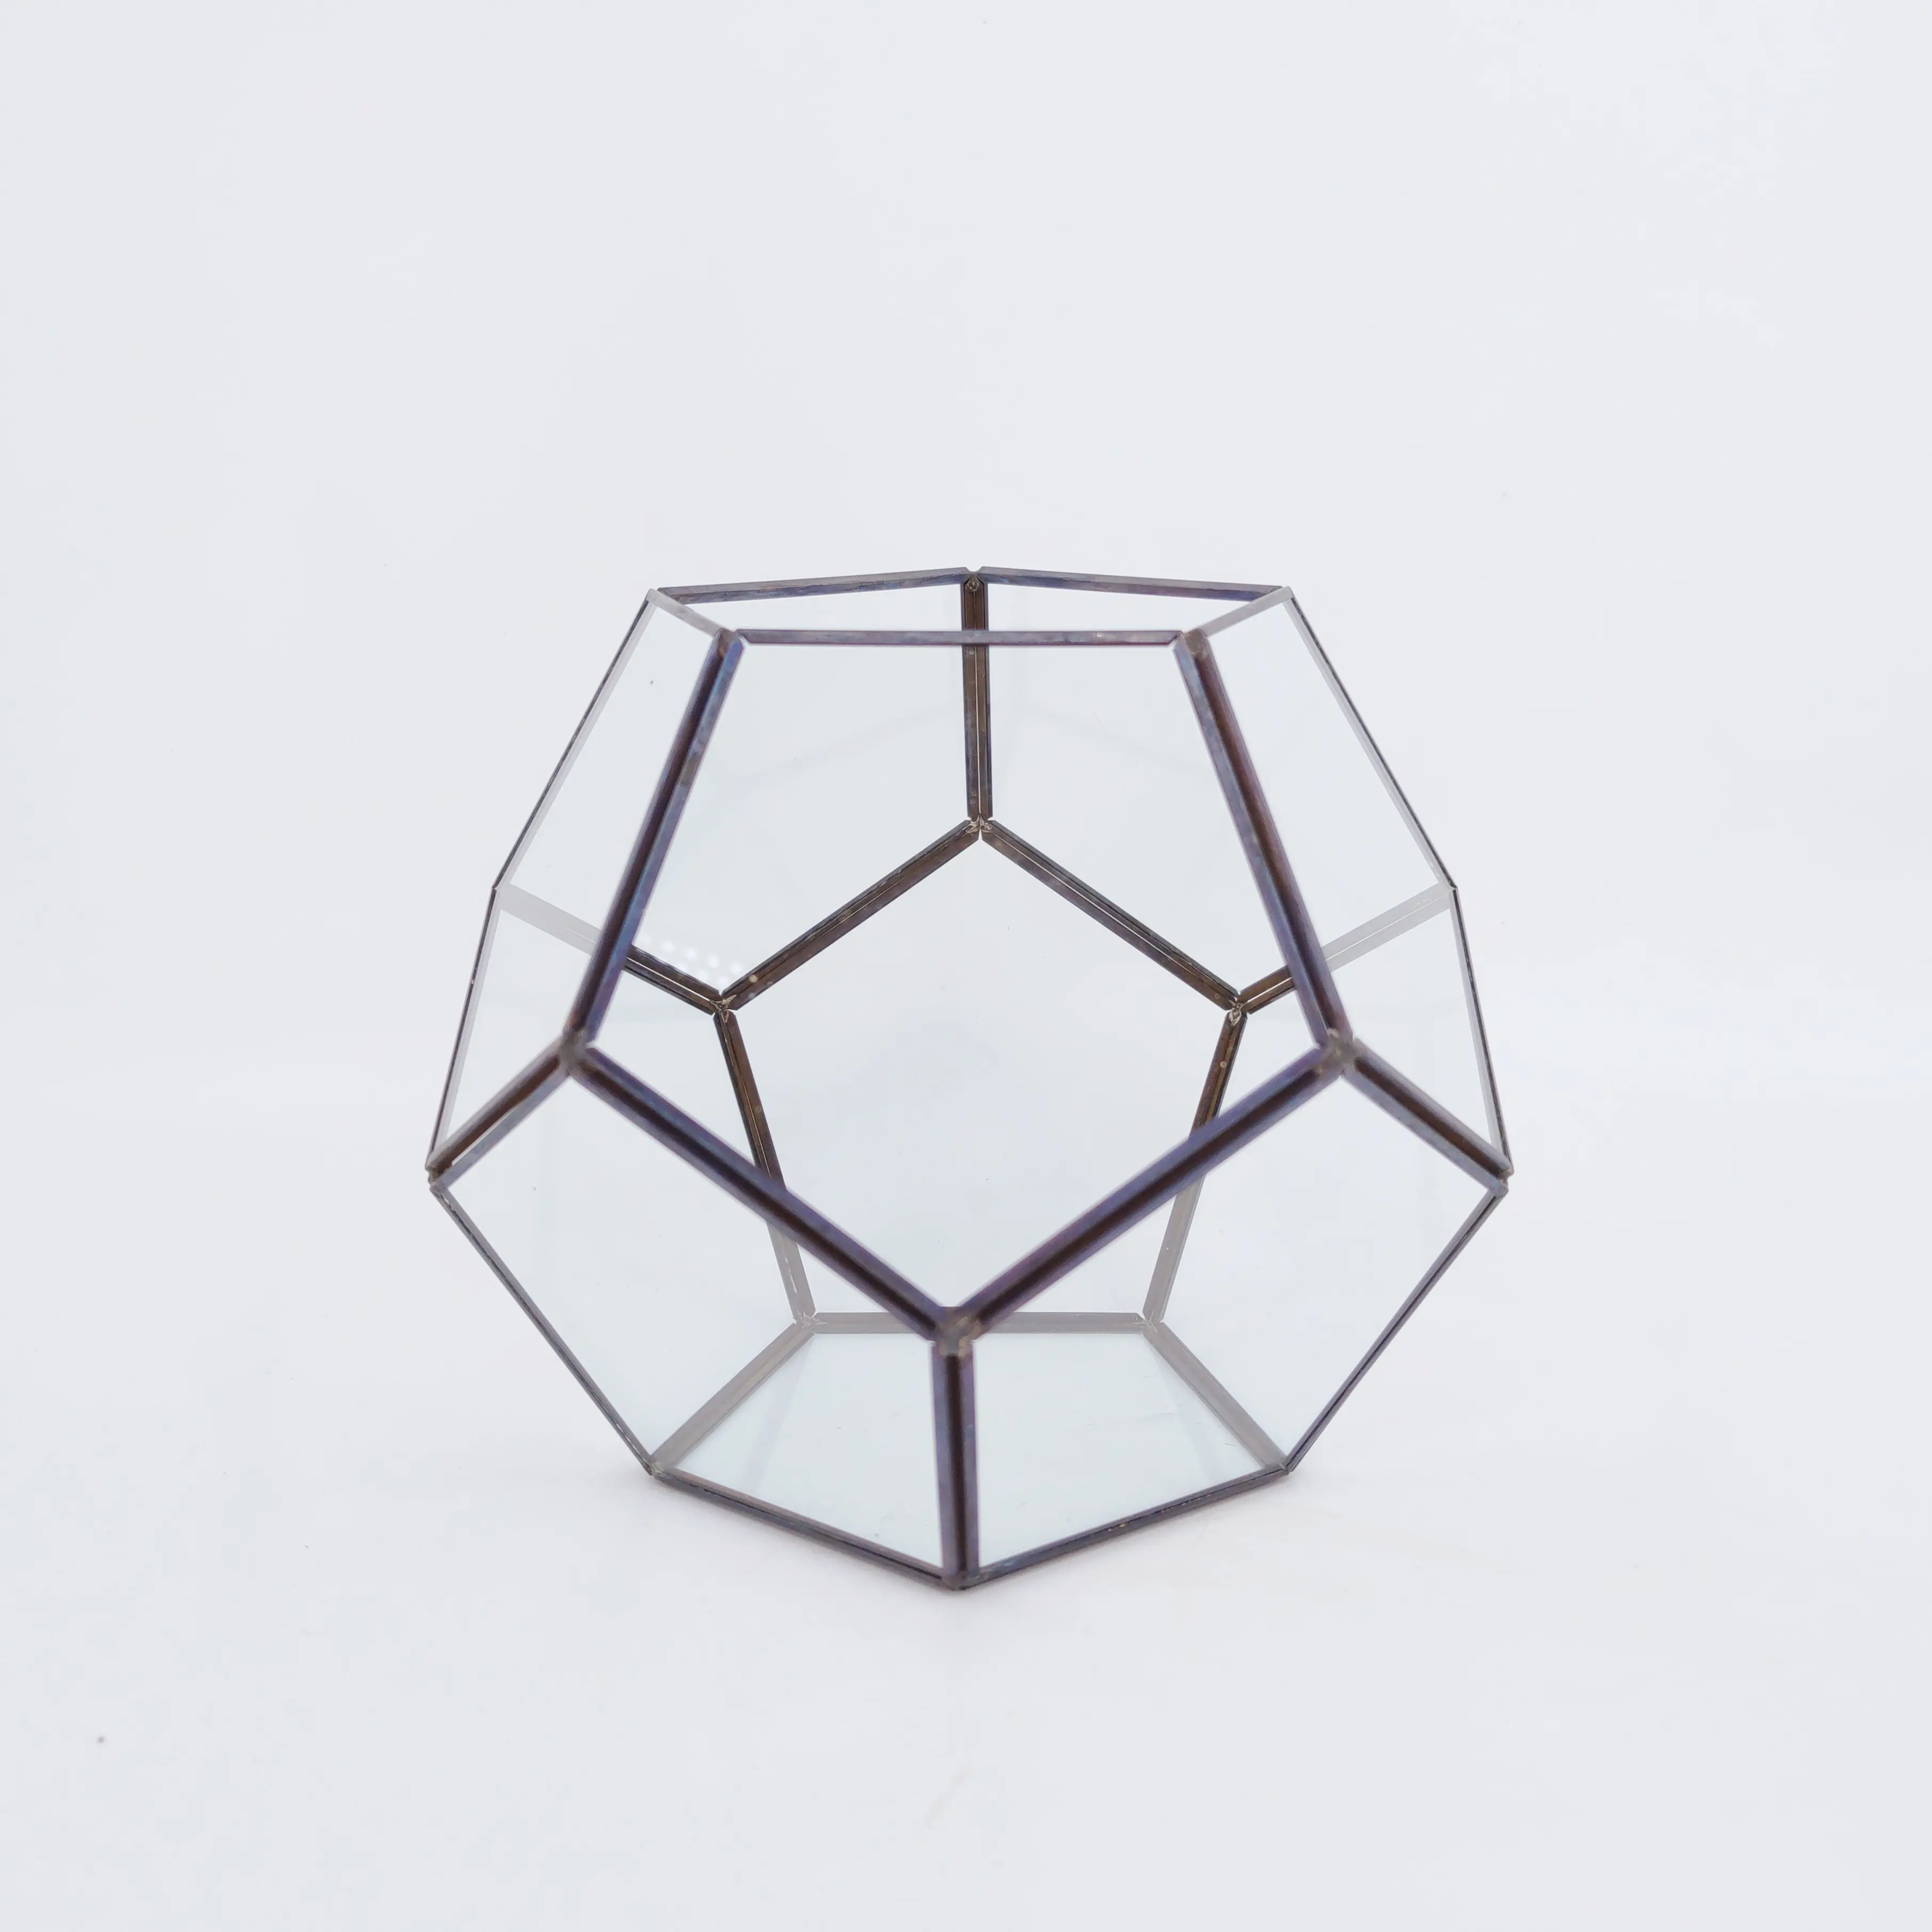 Creative Desk Geometric Terrarium Glass With Modern Style For Home Decoration